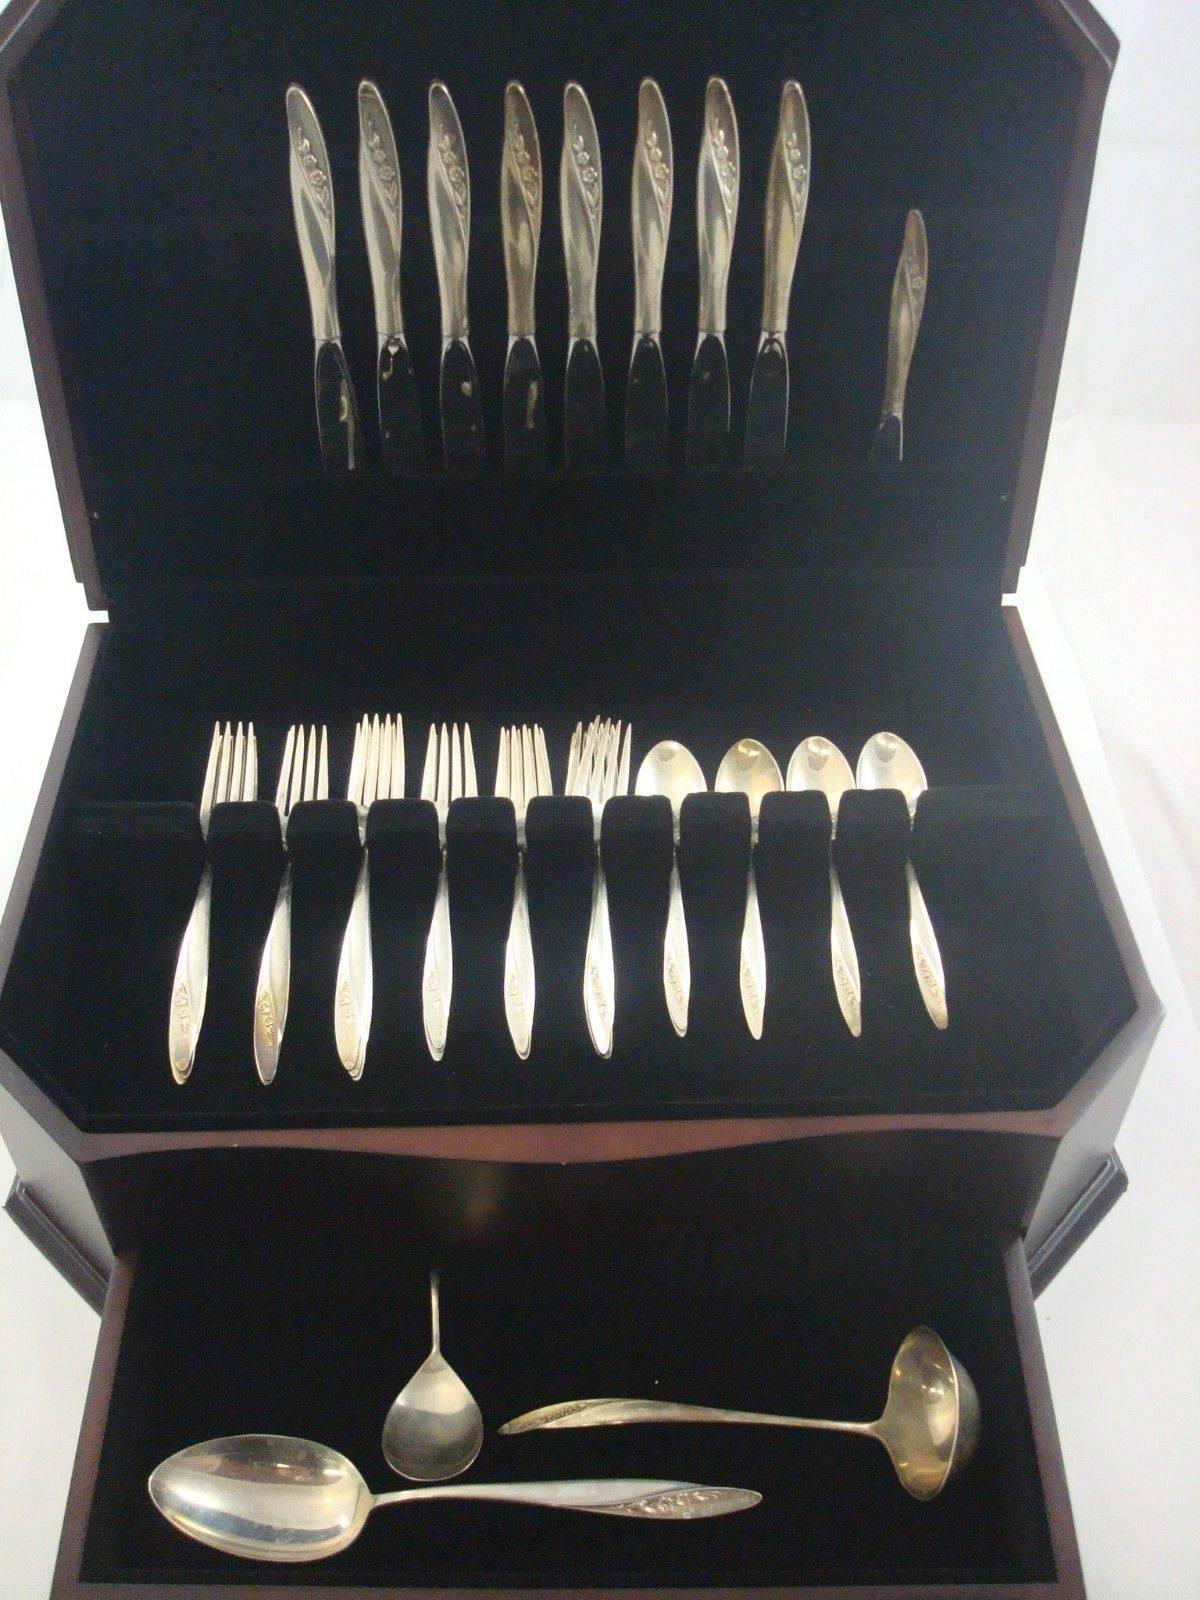 Blithe spirit by Gorham sterling silver flatware set, 36 pieces. This set includes: 

eight knives, 9 1/4